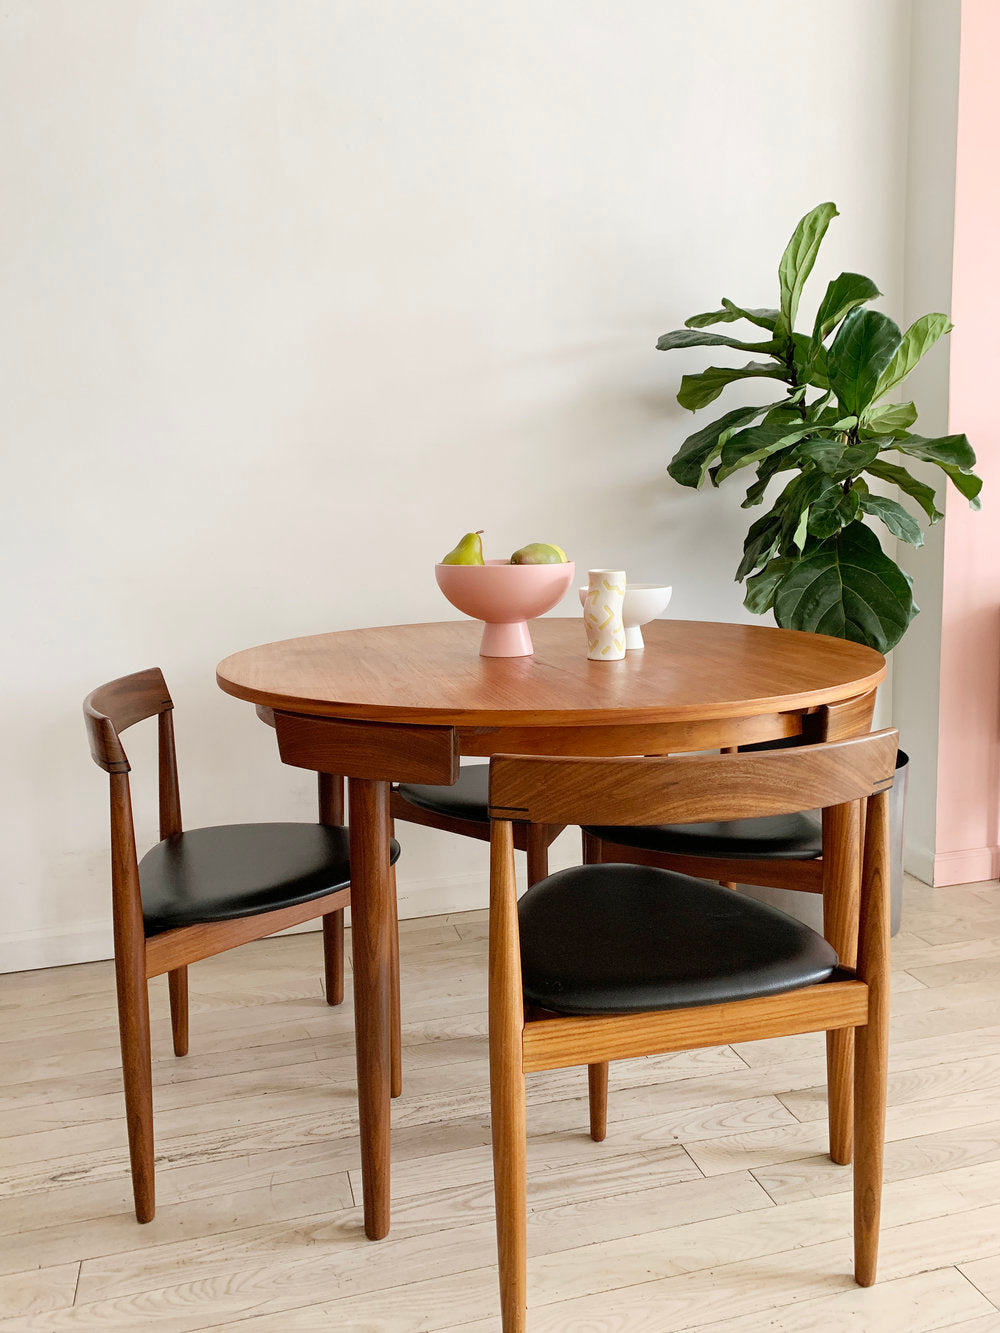 Mid Century "Roundette" Teak Dining Table w/4 Chairs by Hans Olsen for Frem Røjle